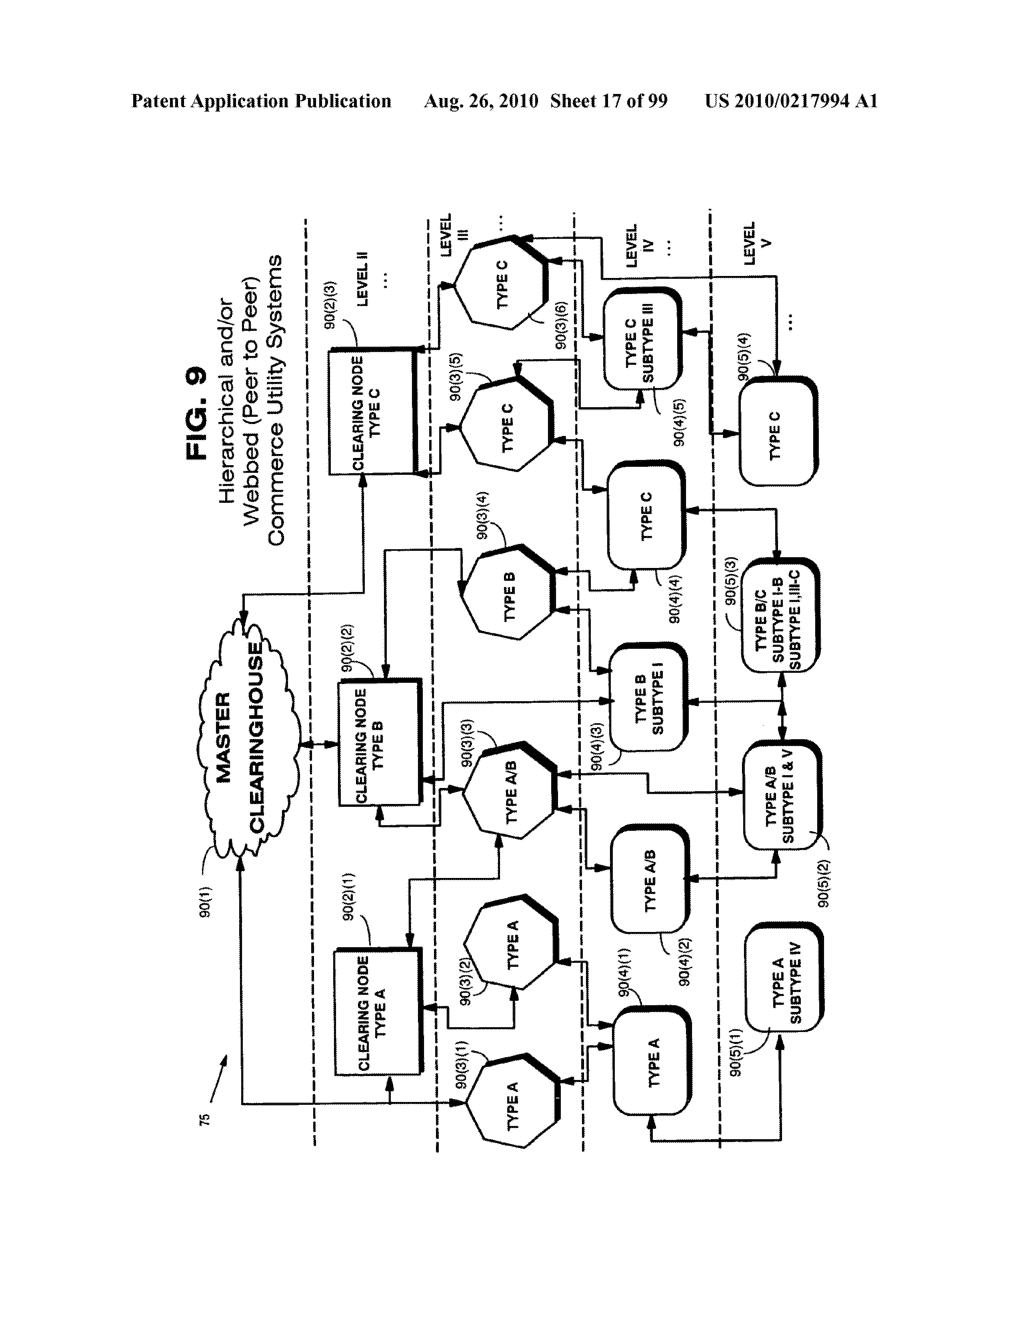 Trusted Infrastructure Support Systems, Methods and Techniques for Secure Electronic Commerce, Electronic Transactions, Commerce Process Control and Automation, Distributed Computing, And Rights Management - diagram, schematic, and image 18